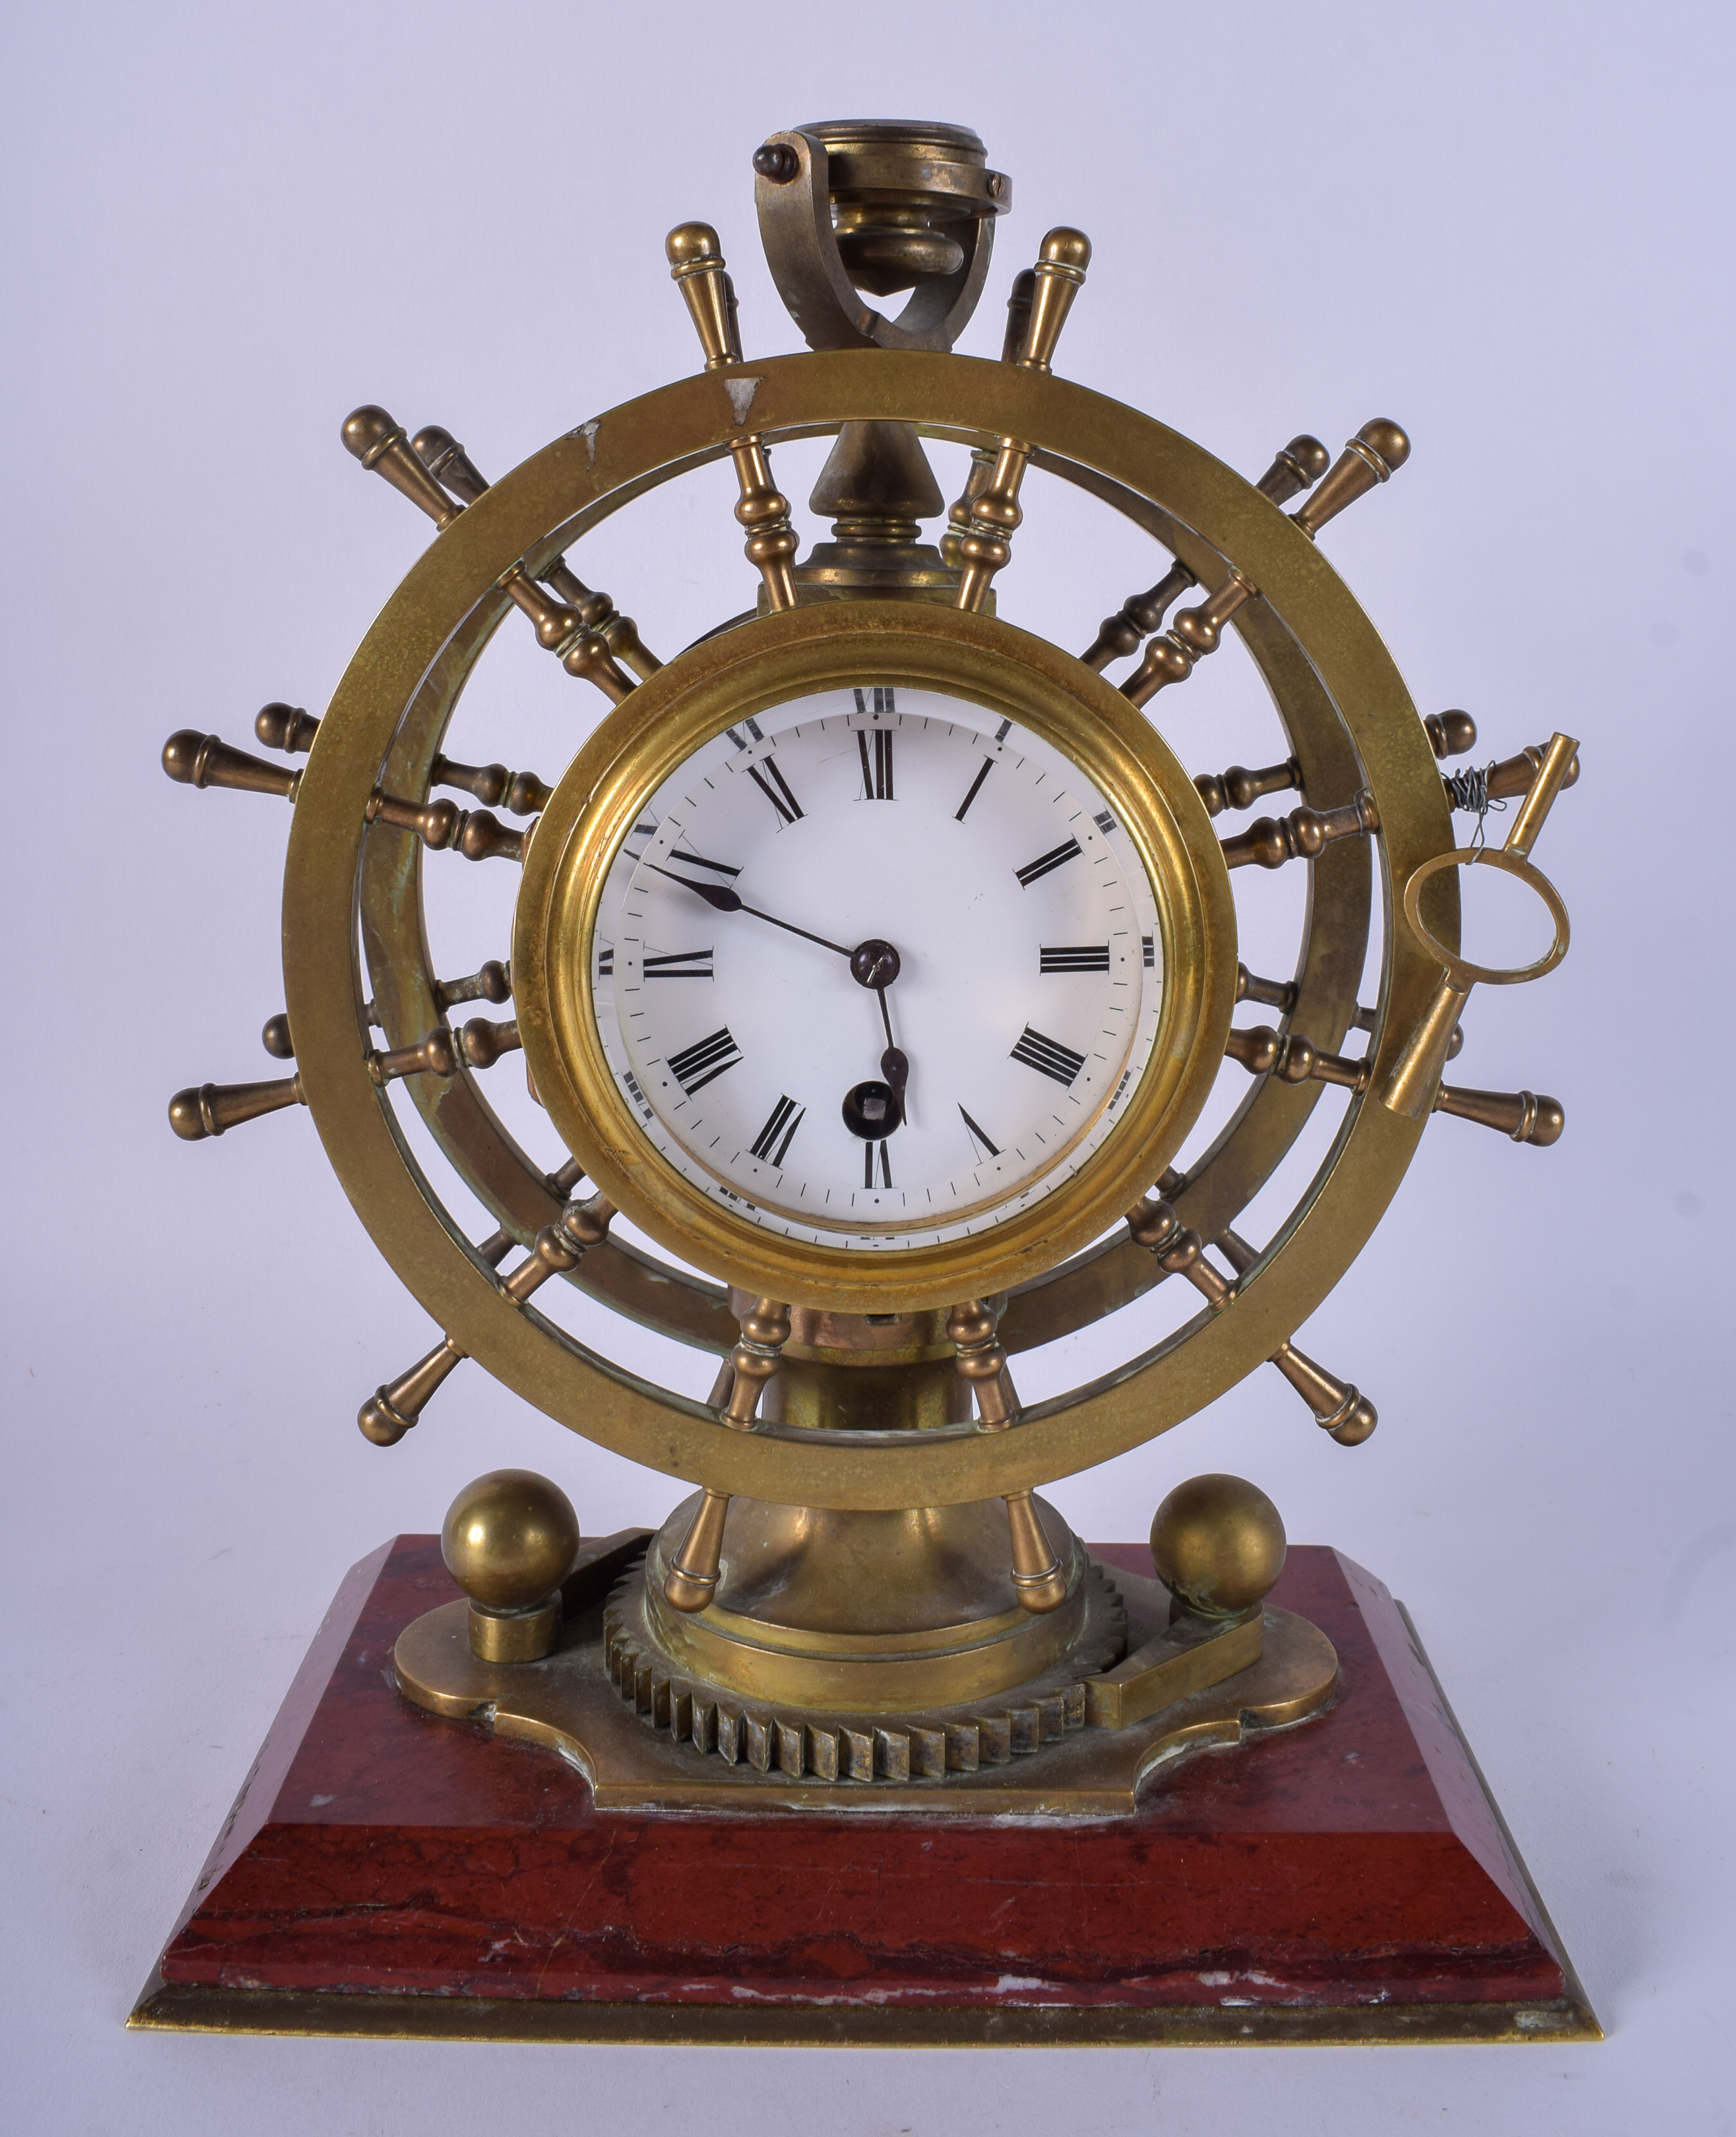 A RARE 19TH CENTURY FRENCH INDUSTRIAL SHIPS WHEEL BRONZE CLOCK with twin dials, silvered compass an